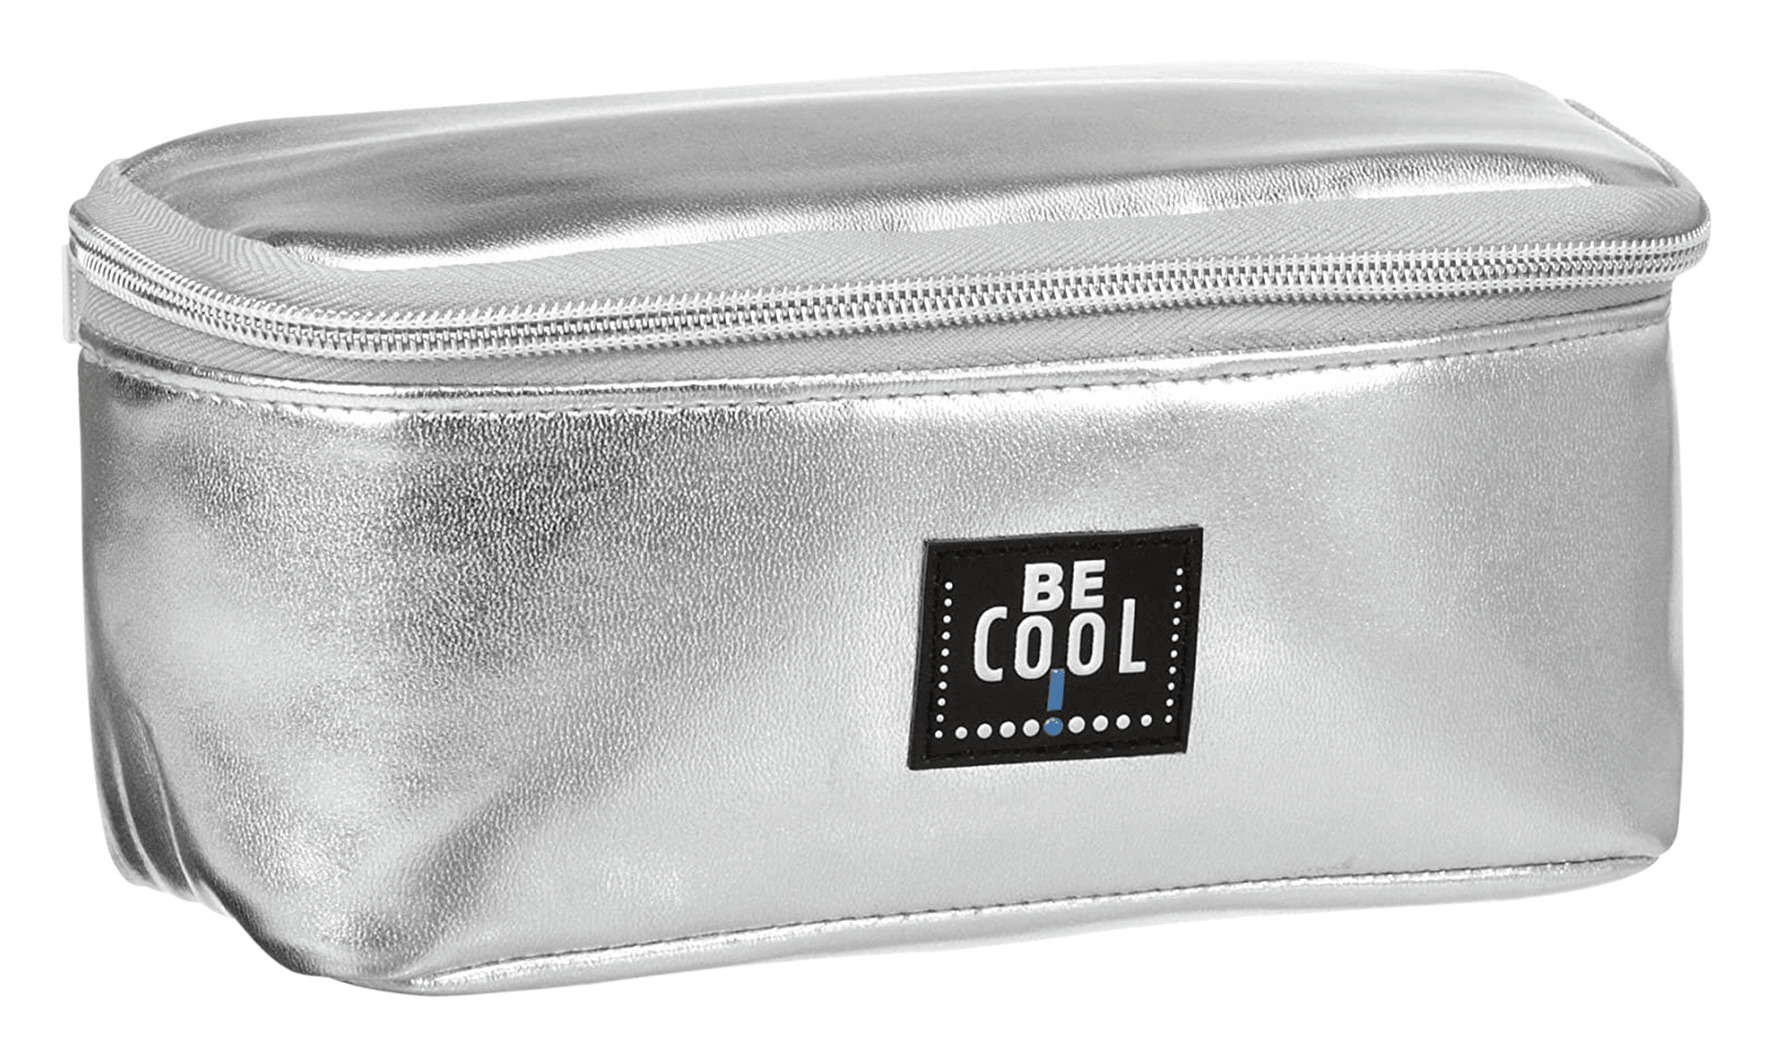 BeCooL sac isotherme Silver 10 l - Sac isotherme pratique